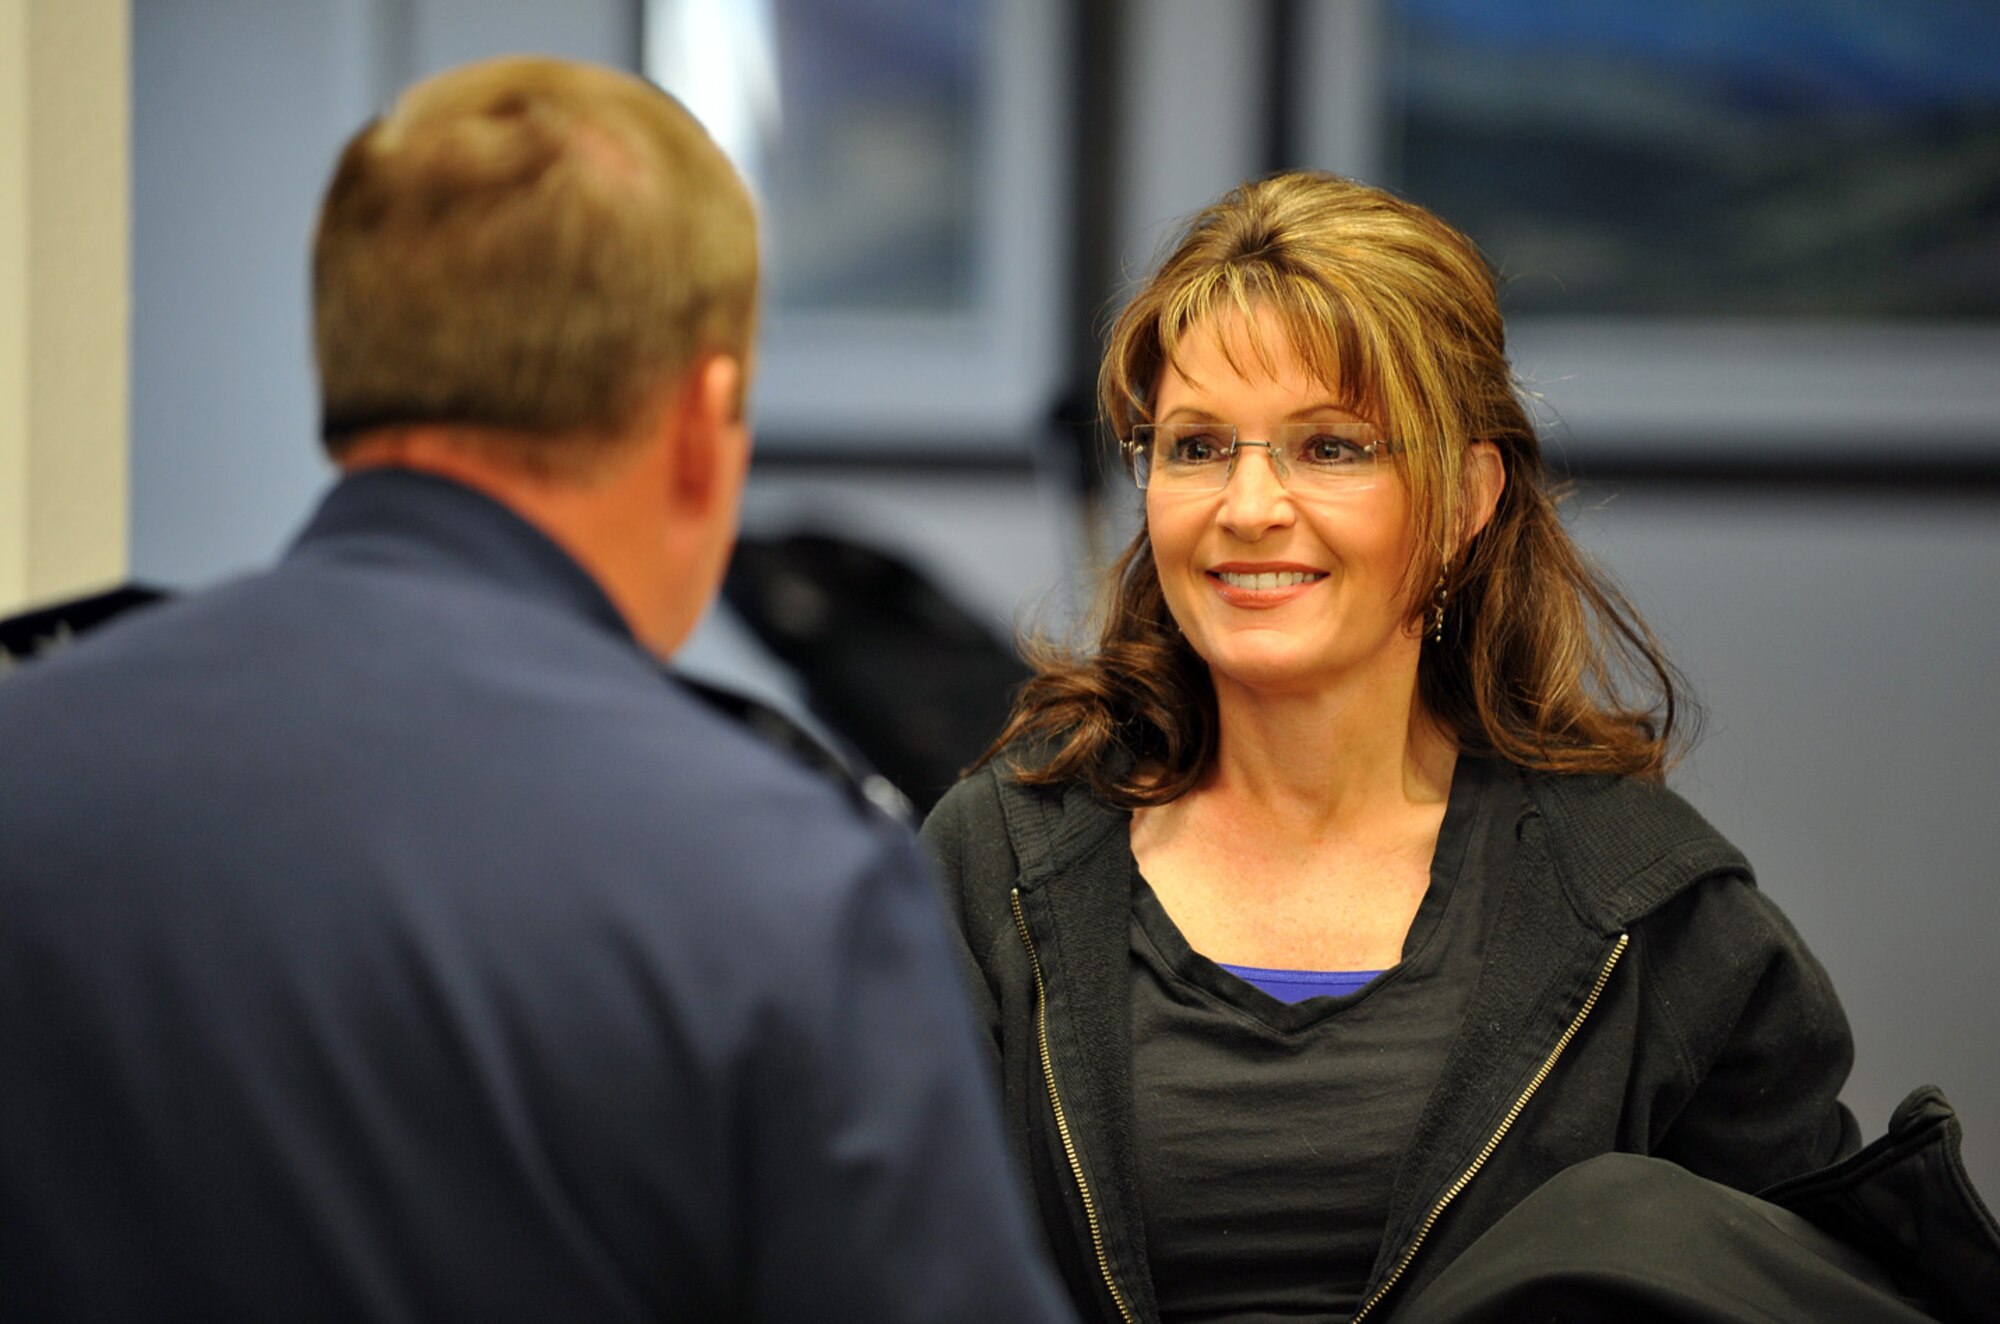 090622-F-2034C-004
Lt. Gen. Dana T. Atkins, Alaskan Command commander talk with Sarah Palin, Governor of Alaska at the passenger terminal on Elmendorf Air Force Base June 22, 2009. Gov. Palin is visiting the base to get a safety briefing before heading out to the USS John C. Stennis (CVN 74) for a distinguished visitor tour during Exercise Northern Edge 09. Northern Edge is Alaska?s largest military training exercise that prepares joint forces to respond to crises throughout the Asia-Pacific region. (U.S. Air Force photo/ MSgt Shane A. Cuomo) RELEASED
